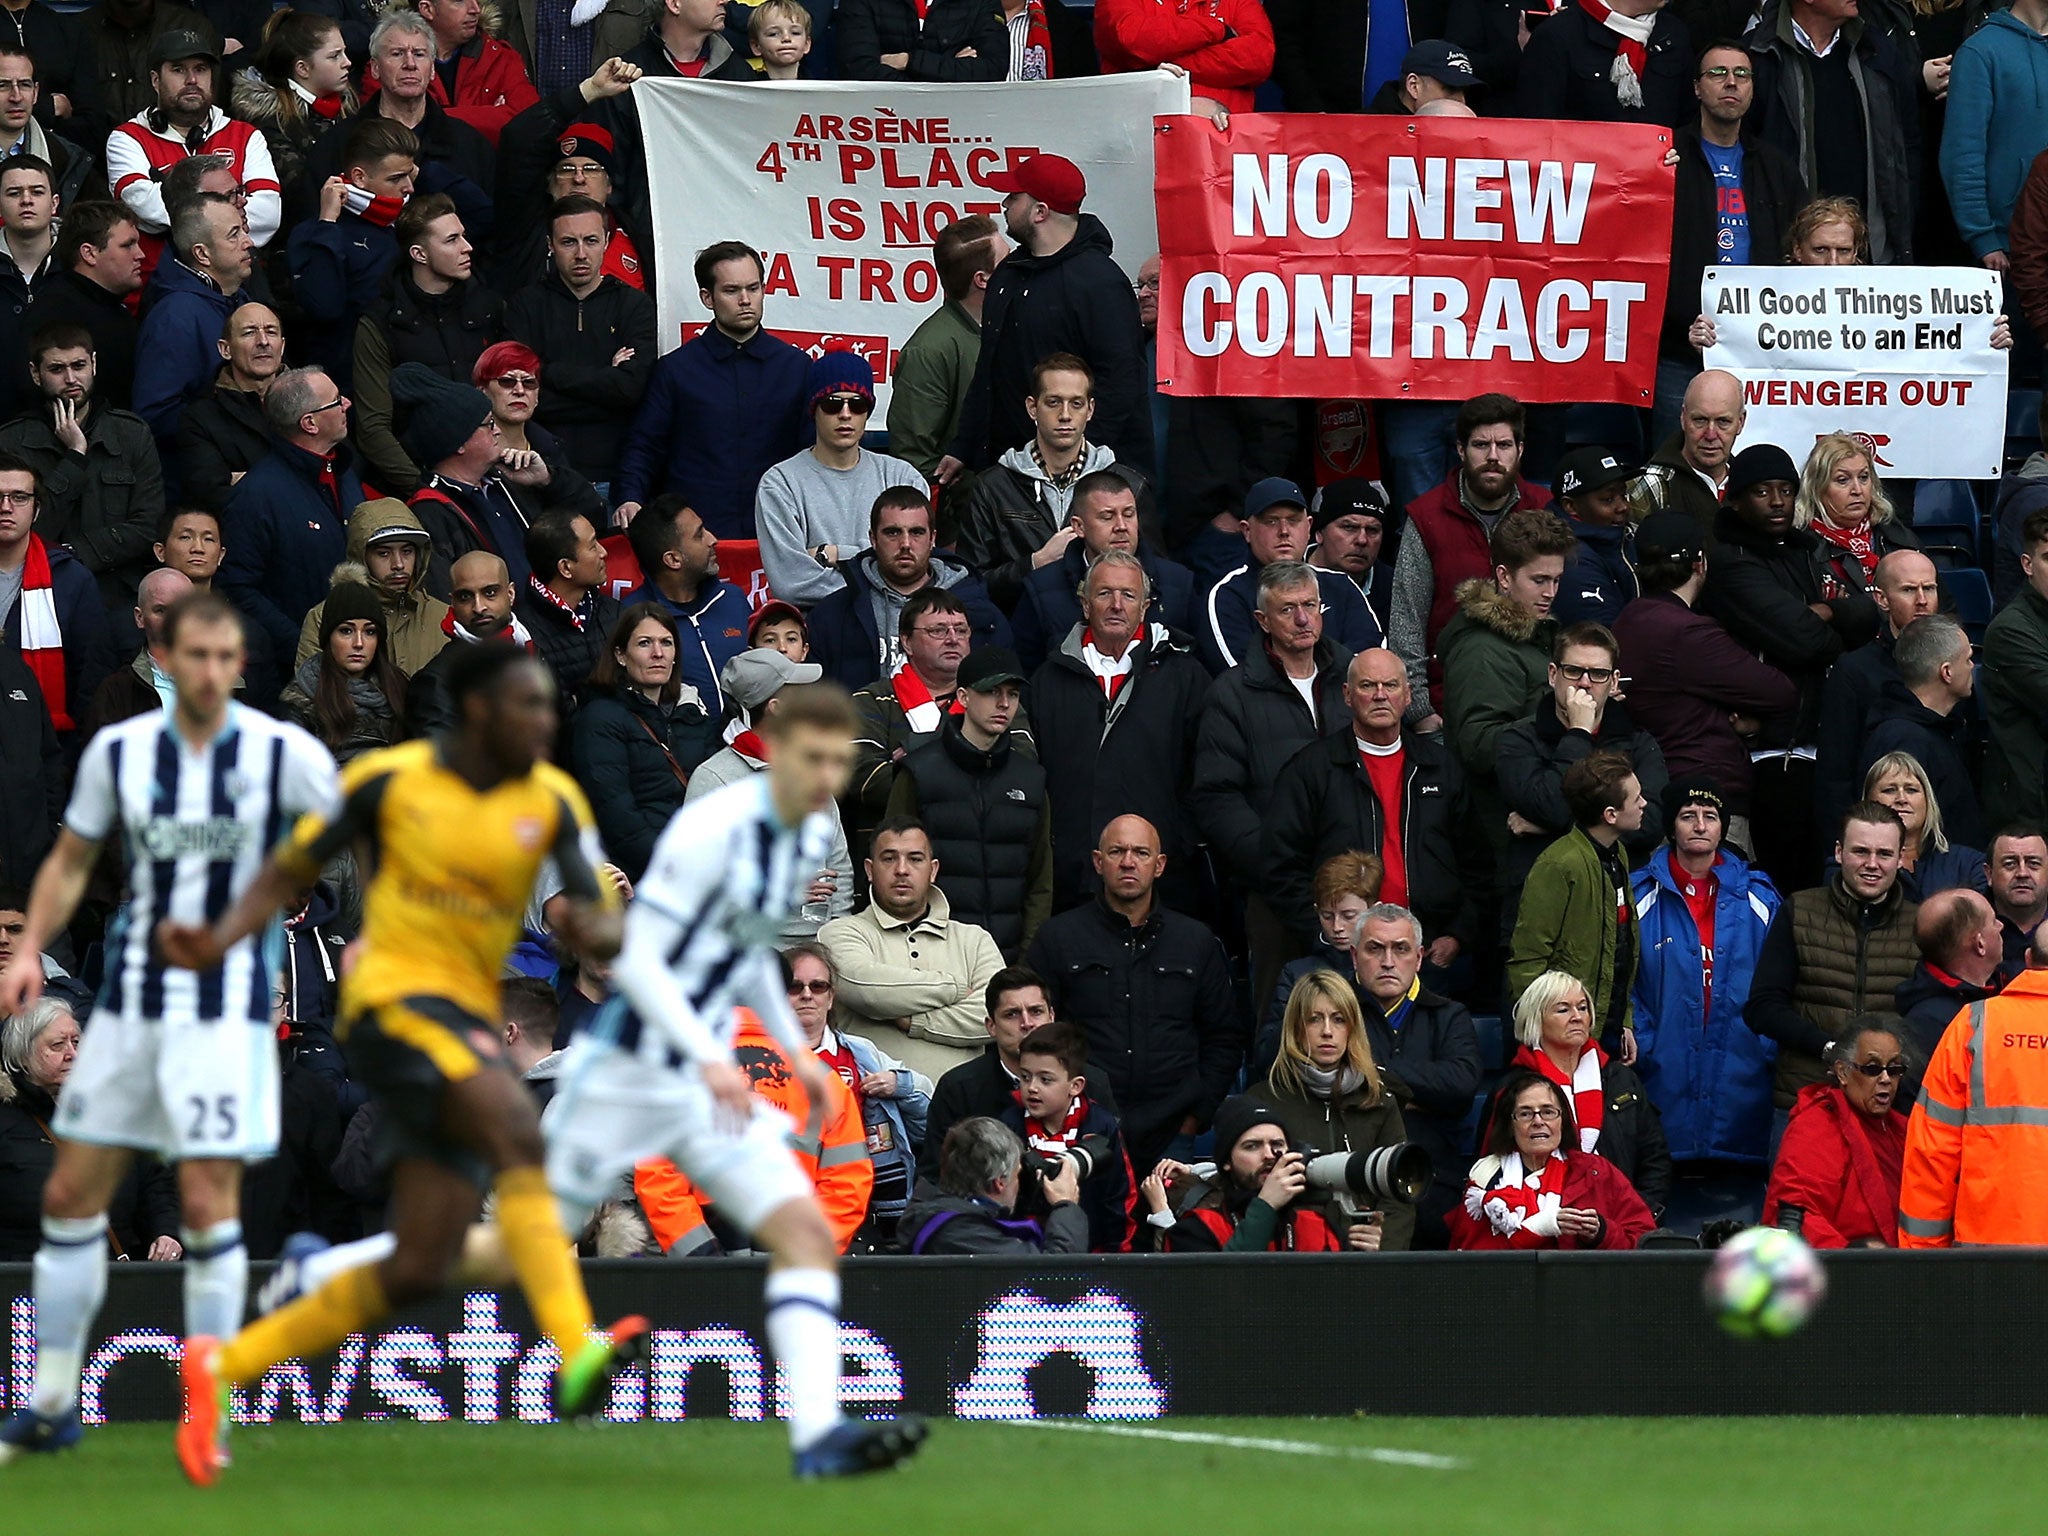 Arsenal fans protest against Wenger during their side's recent defeat by West Brom